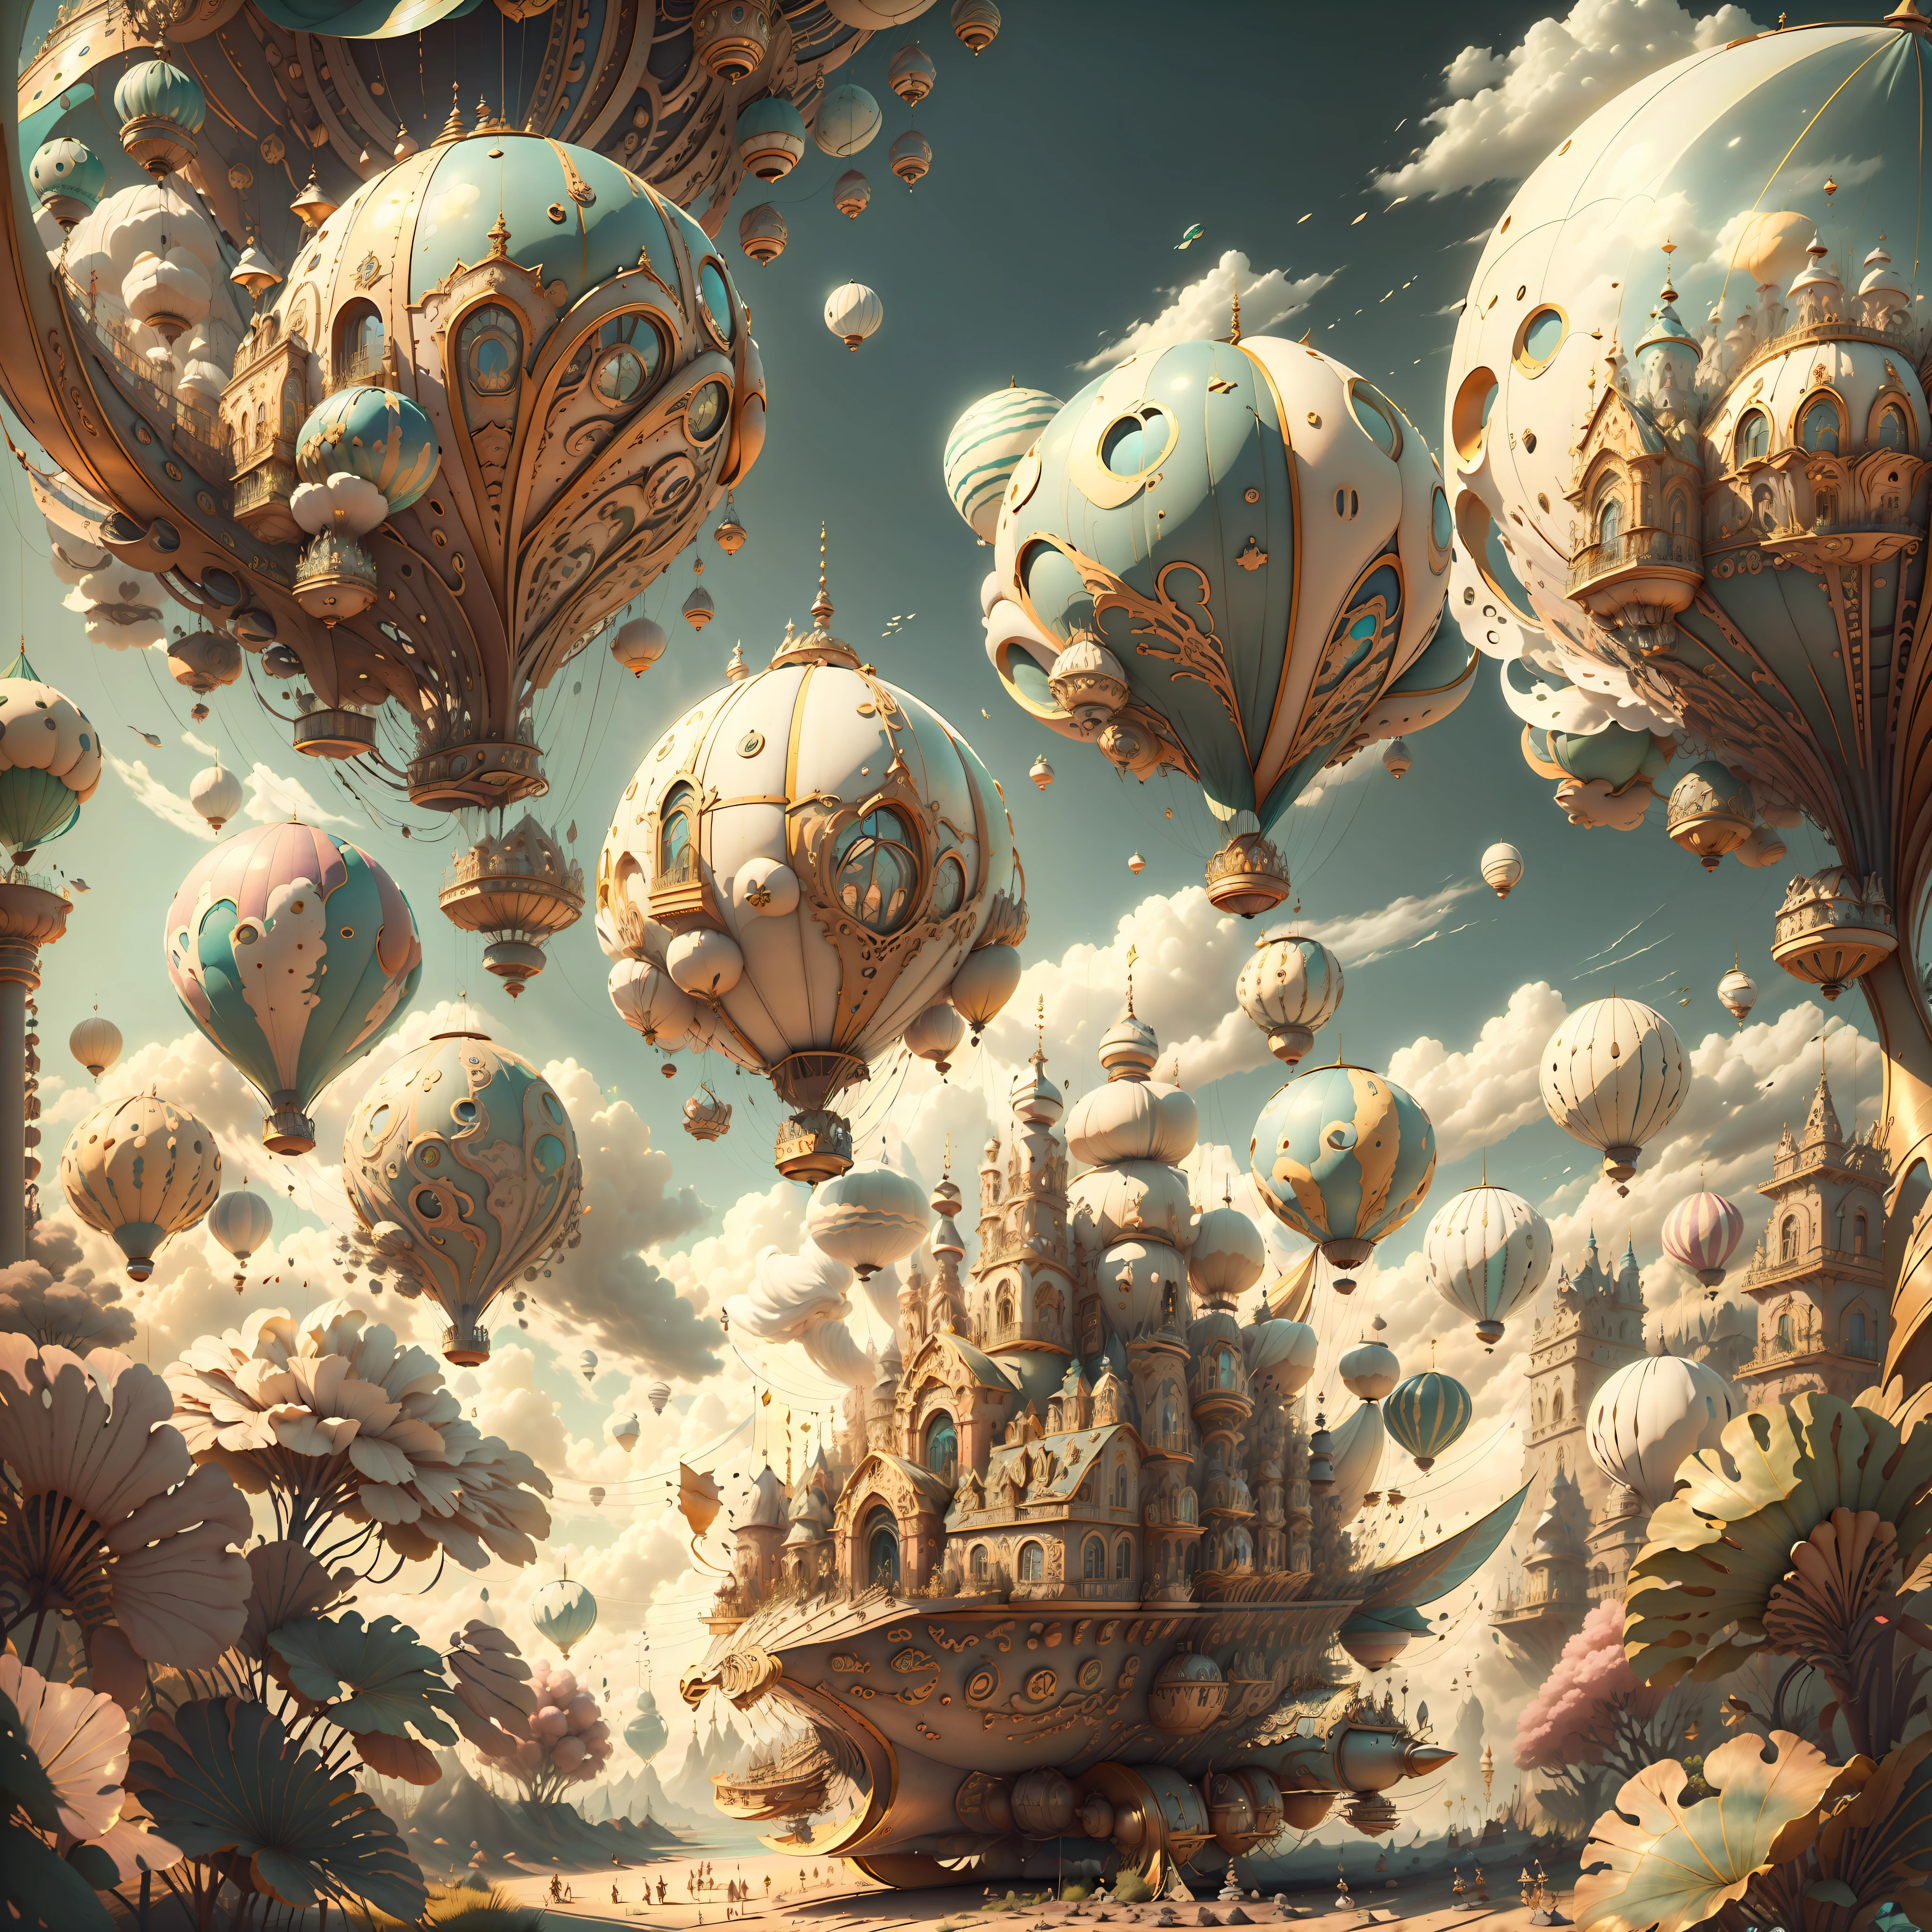 FairyTaleAI Airship, hot air balloon, Airship ZonaiIAI,, ao ar livre, nuvens,, obra-prima, trend, 8k, The scene includes magical sky full of mushrooms and colorful creatures, and audio waves can be heard in the background. The image is rendered on a hot, estilo colorido com foco no contraste e textura, ((melhor qualidade)), ((obra-prima)), ((realidade))